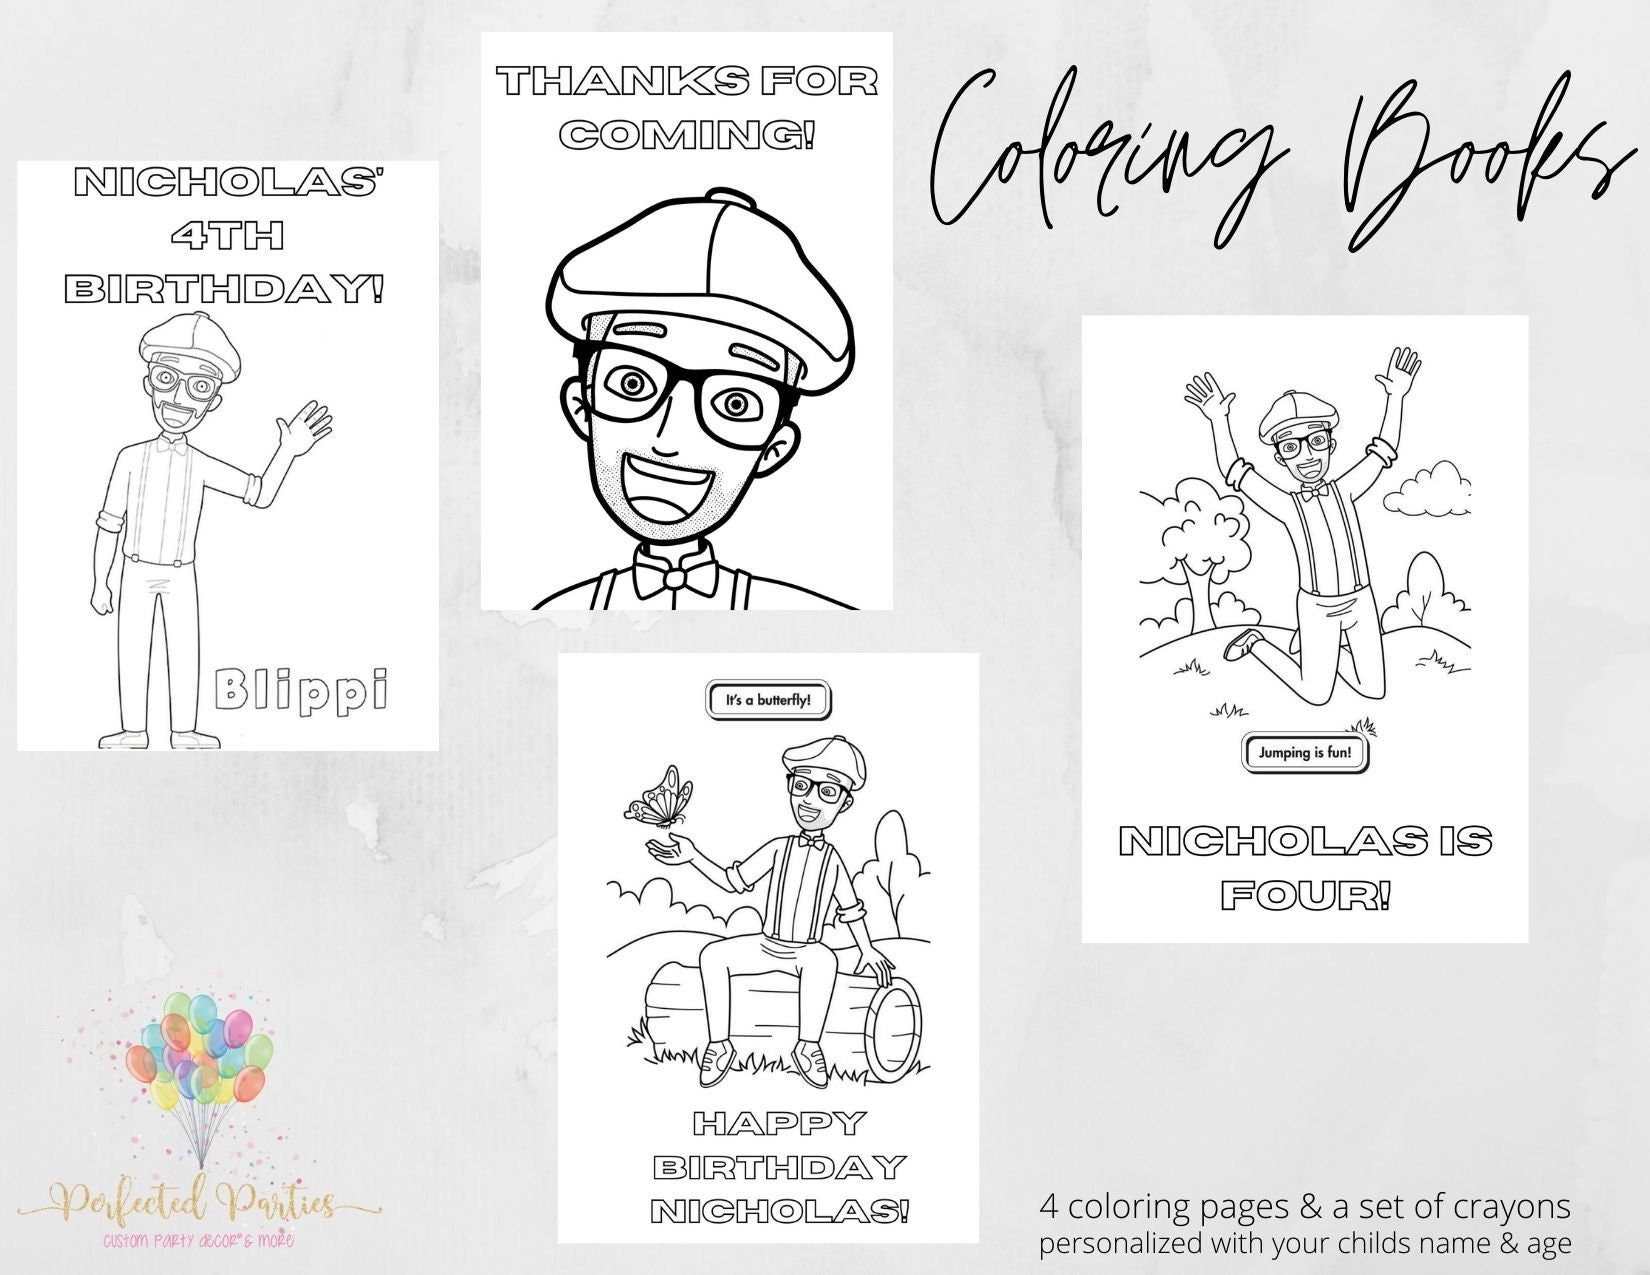 58 Collection Blippi Christmas Coloring Pages  Latest Free